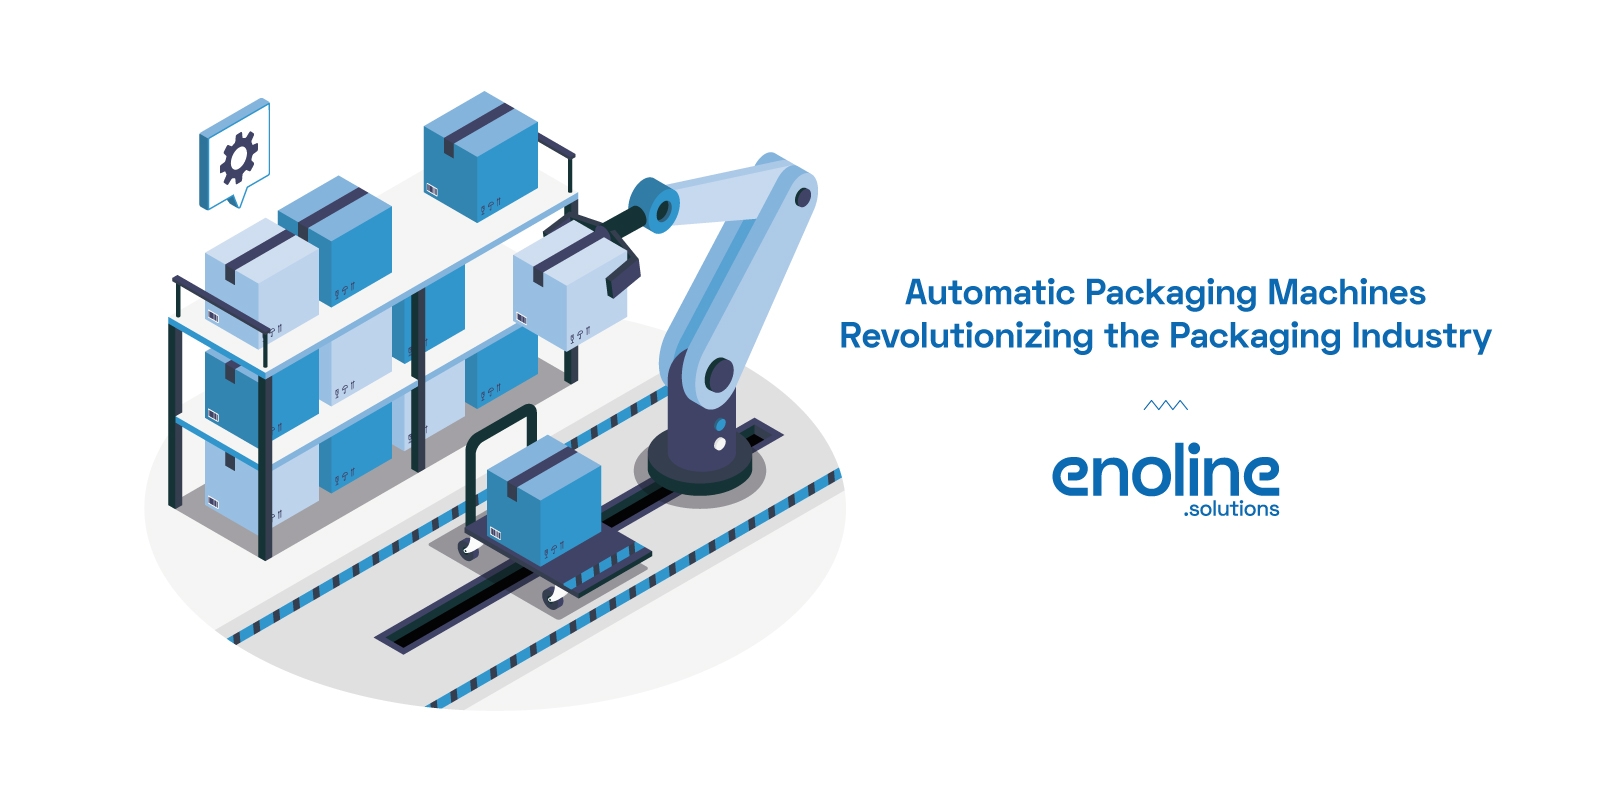 Automatic Packaging Machines Revolutionizing the Packaging Industry